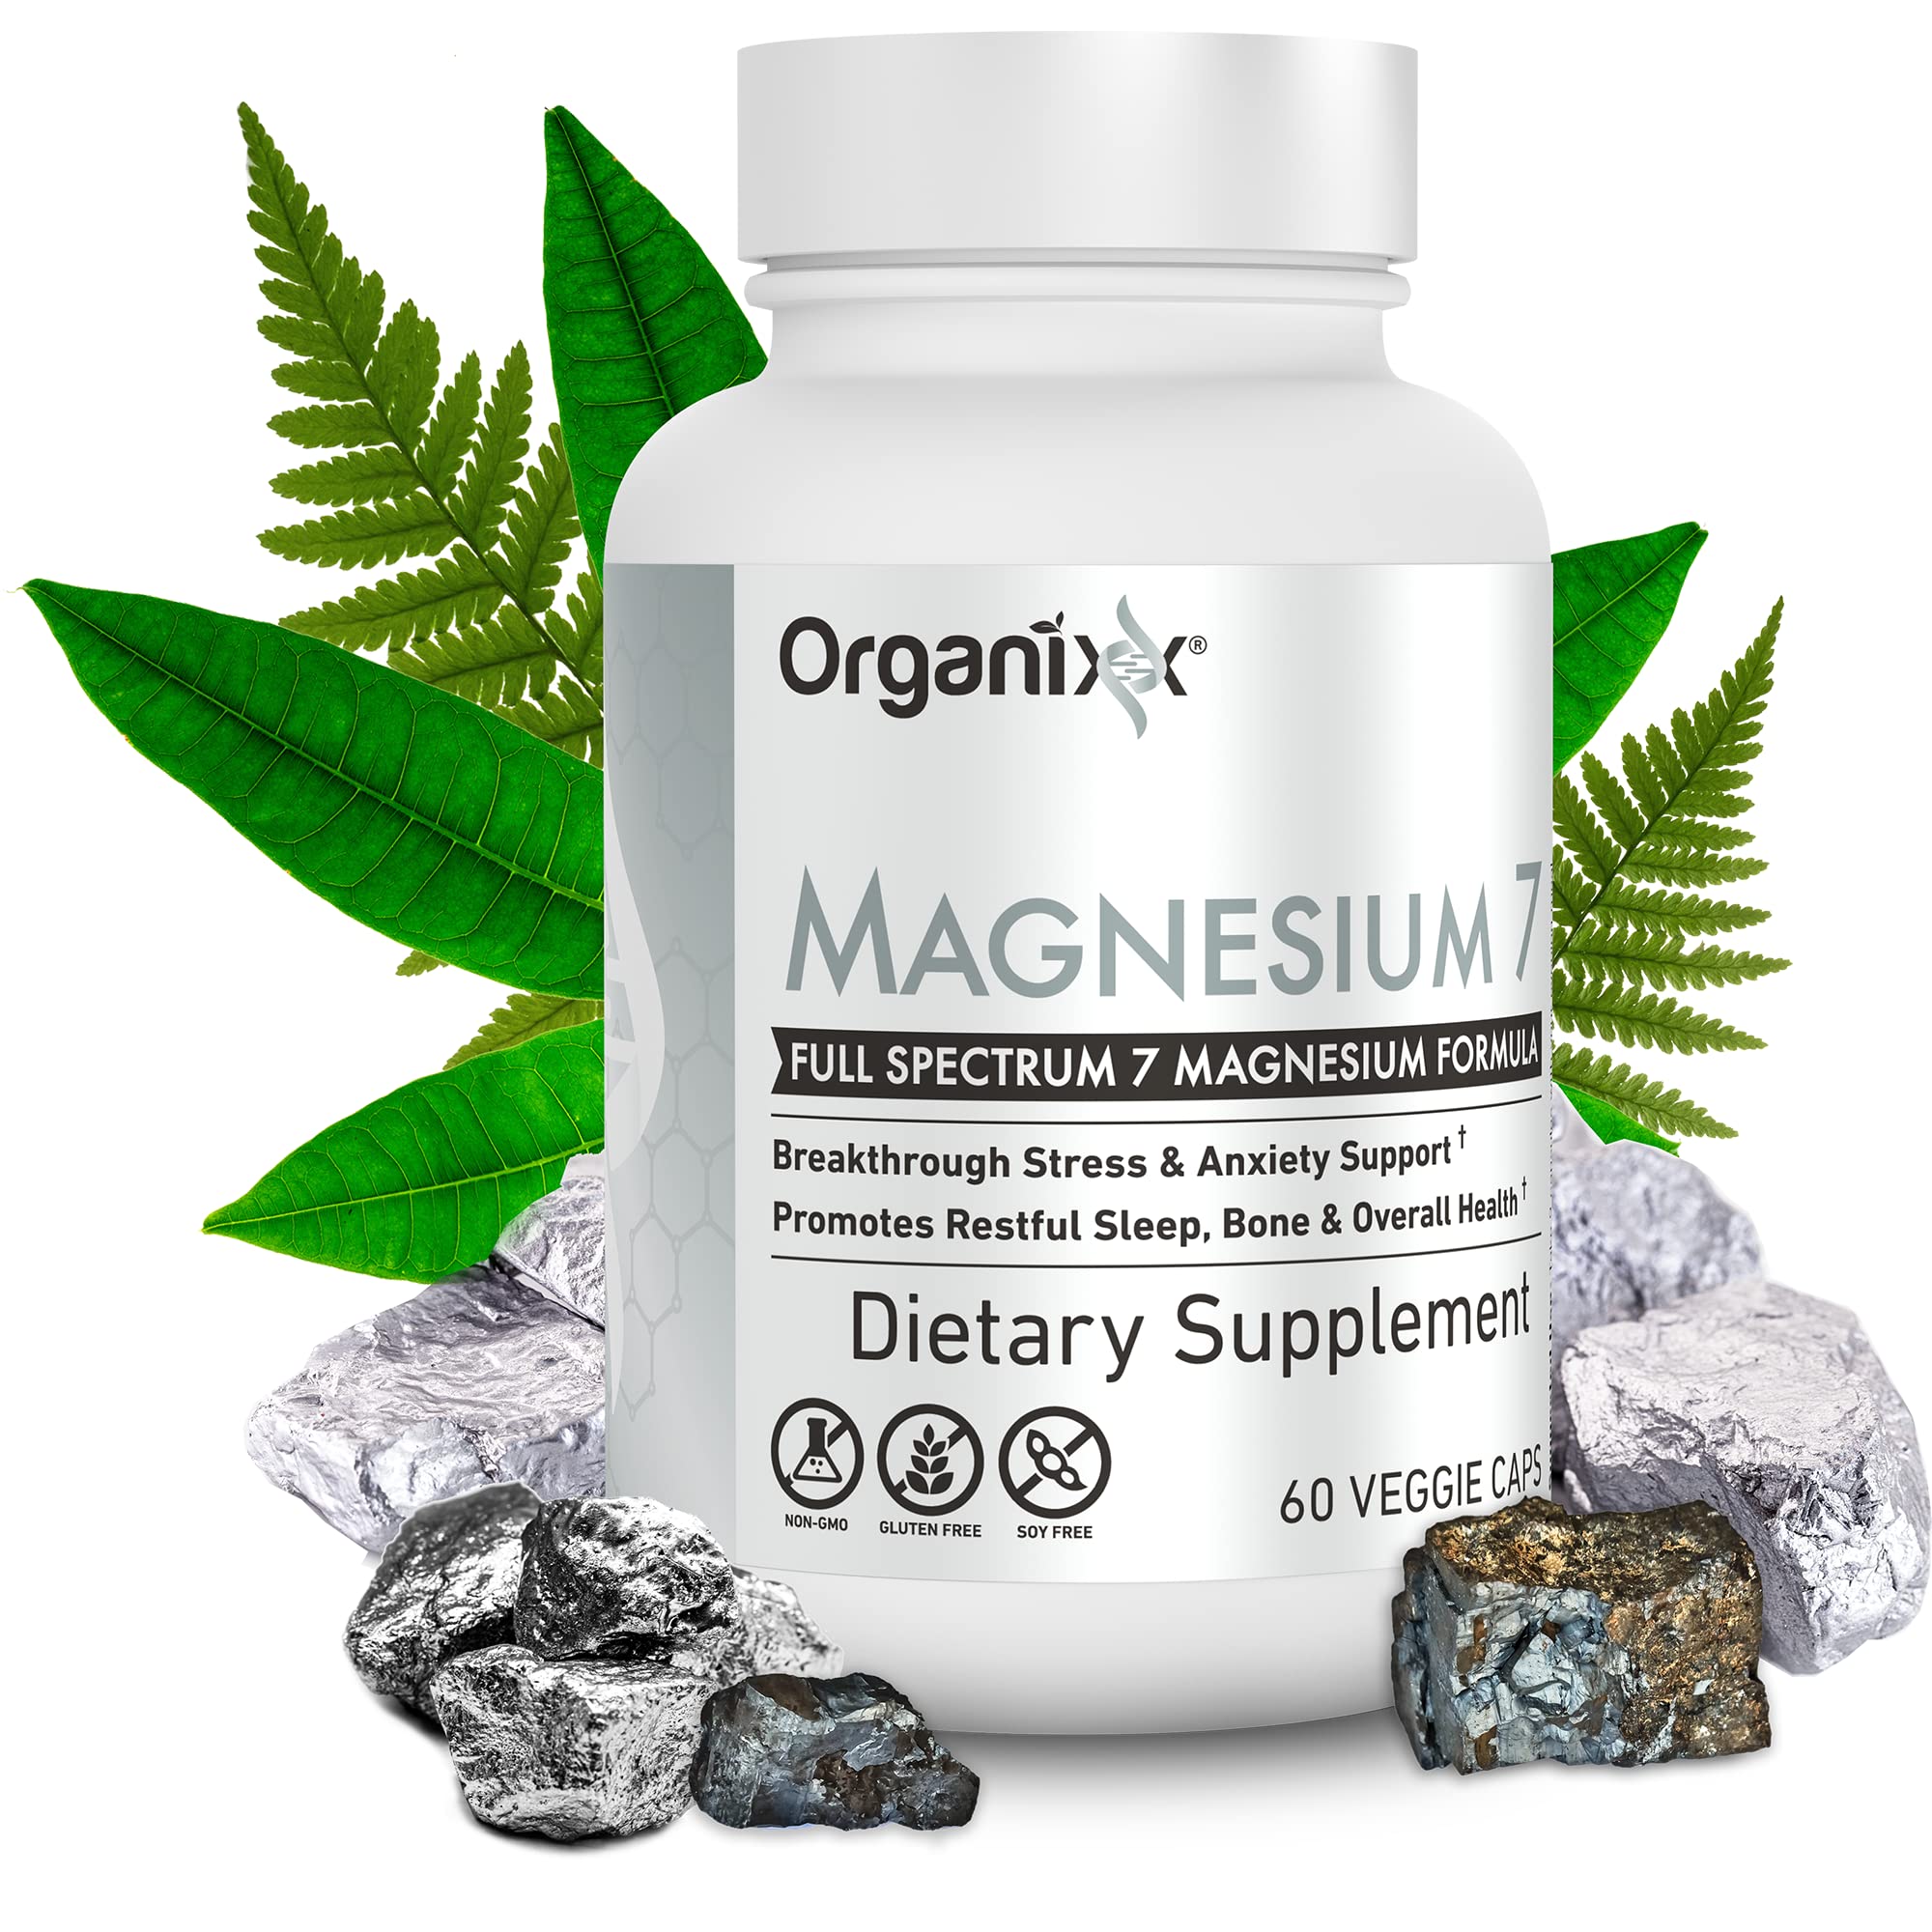 Natural Sleep Support and Recovery Supplement